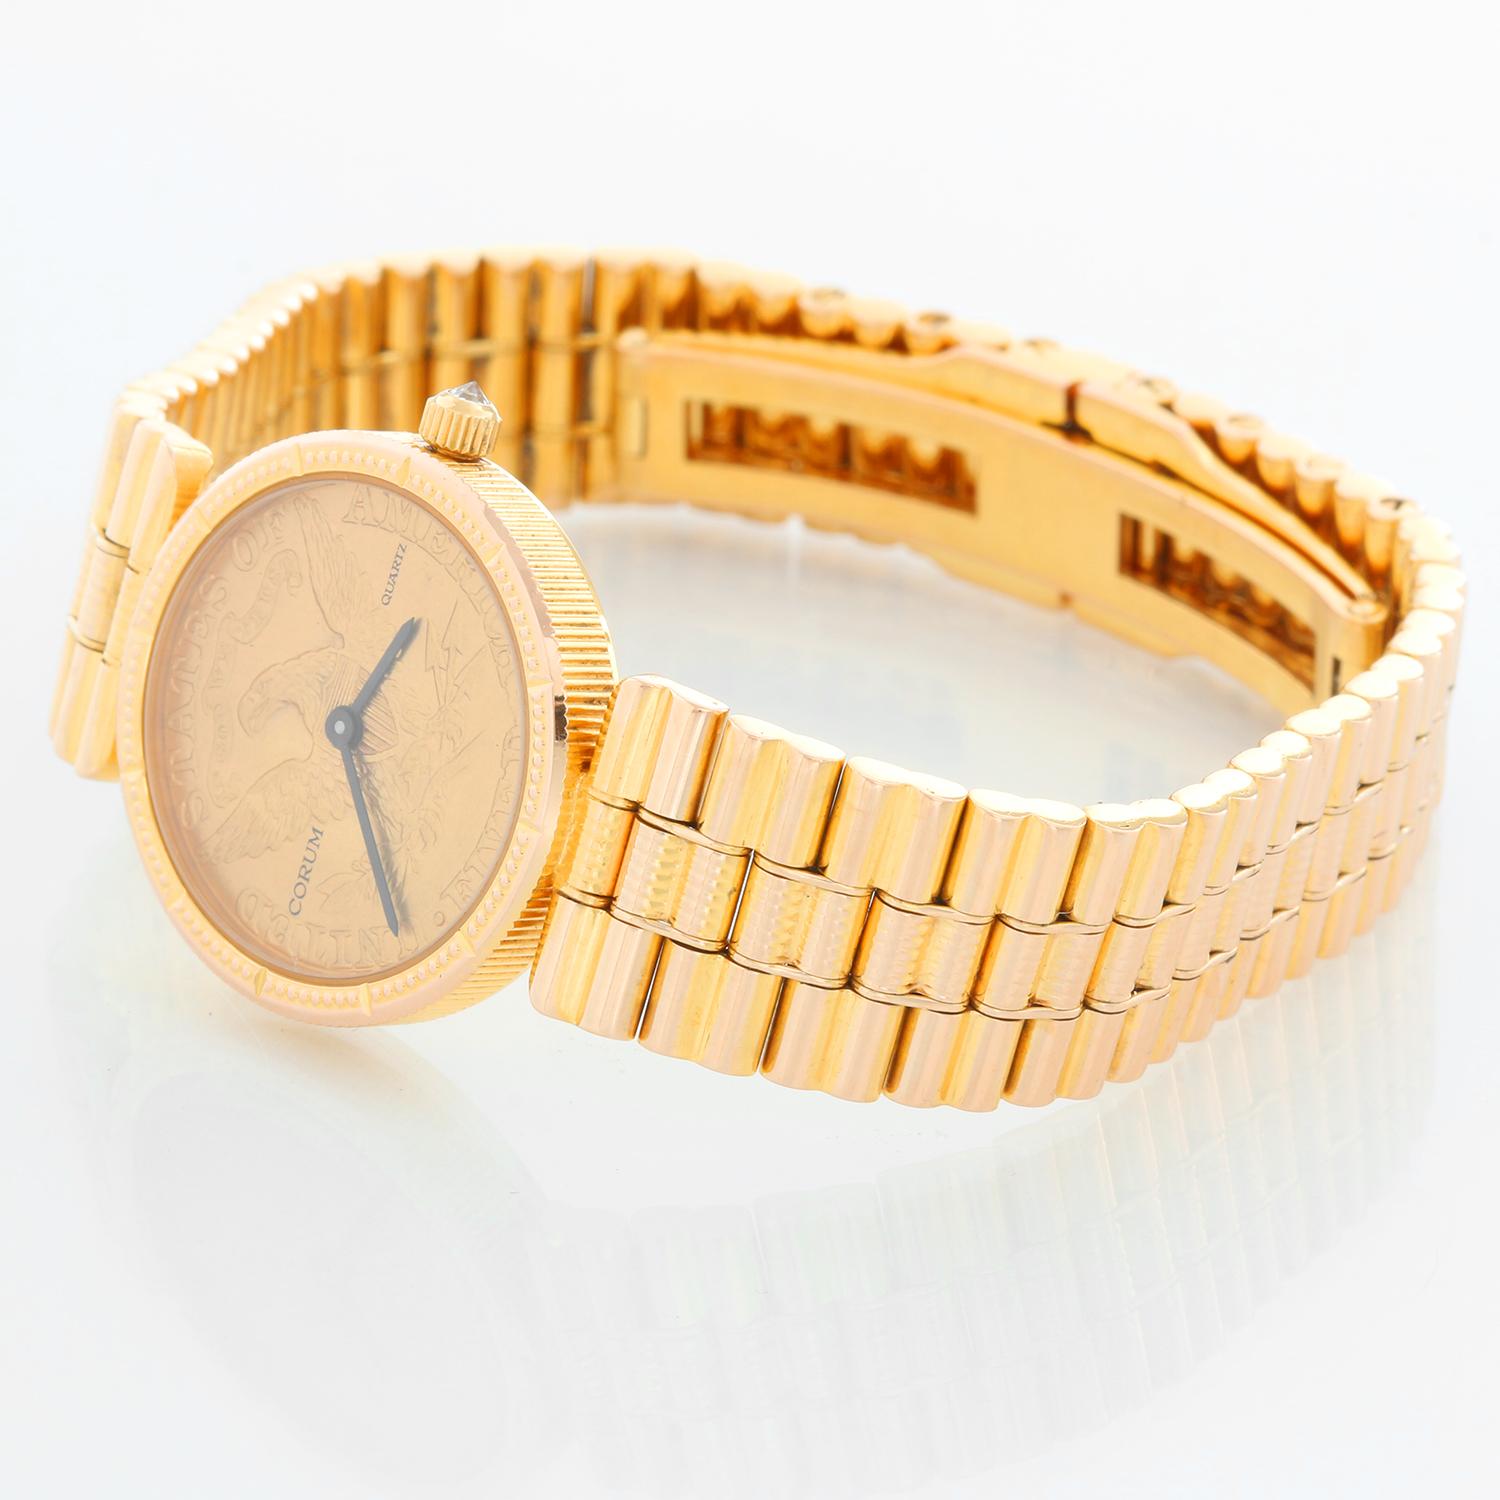 Corum $5 18k Yellow Gold Coin Ladies Watch - Quartz . 18k yellow gold coin (23 mm). 18k yellow gold coin dated 1886. 18k yellow gold Corum bracelet ; Will fit up to a 6 1/4 inch wrist . Pre-owned with custom box .